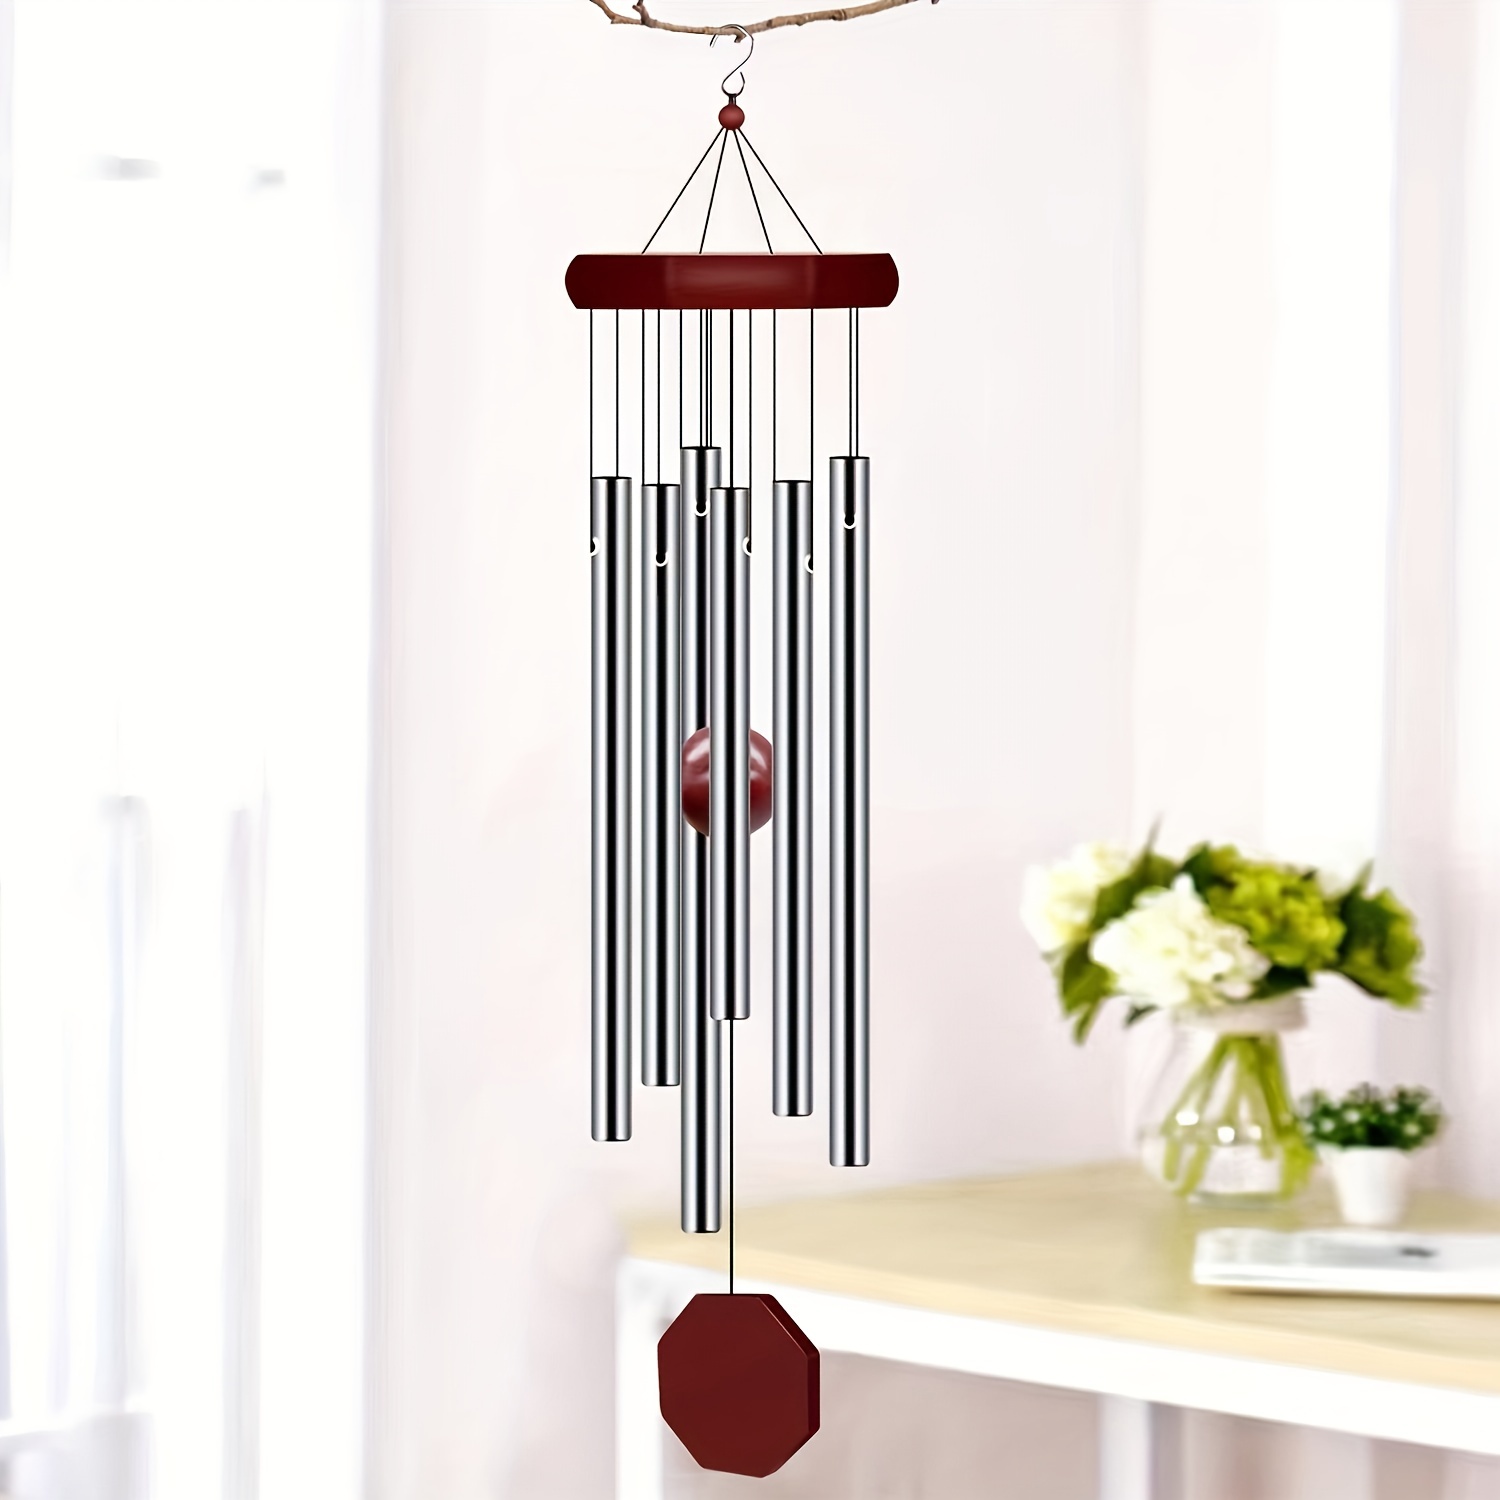 

1pc Memorial Wind Chimes Outdoor Large Deep Tone, Wind Chime Outdoor Sympathy Wind-chime With 6 Tuned Tubes, Elegant Chime For Garden Patio Balcony